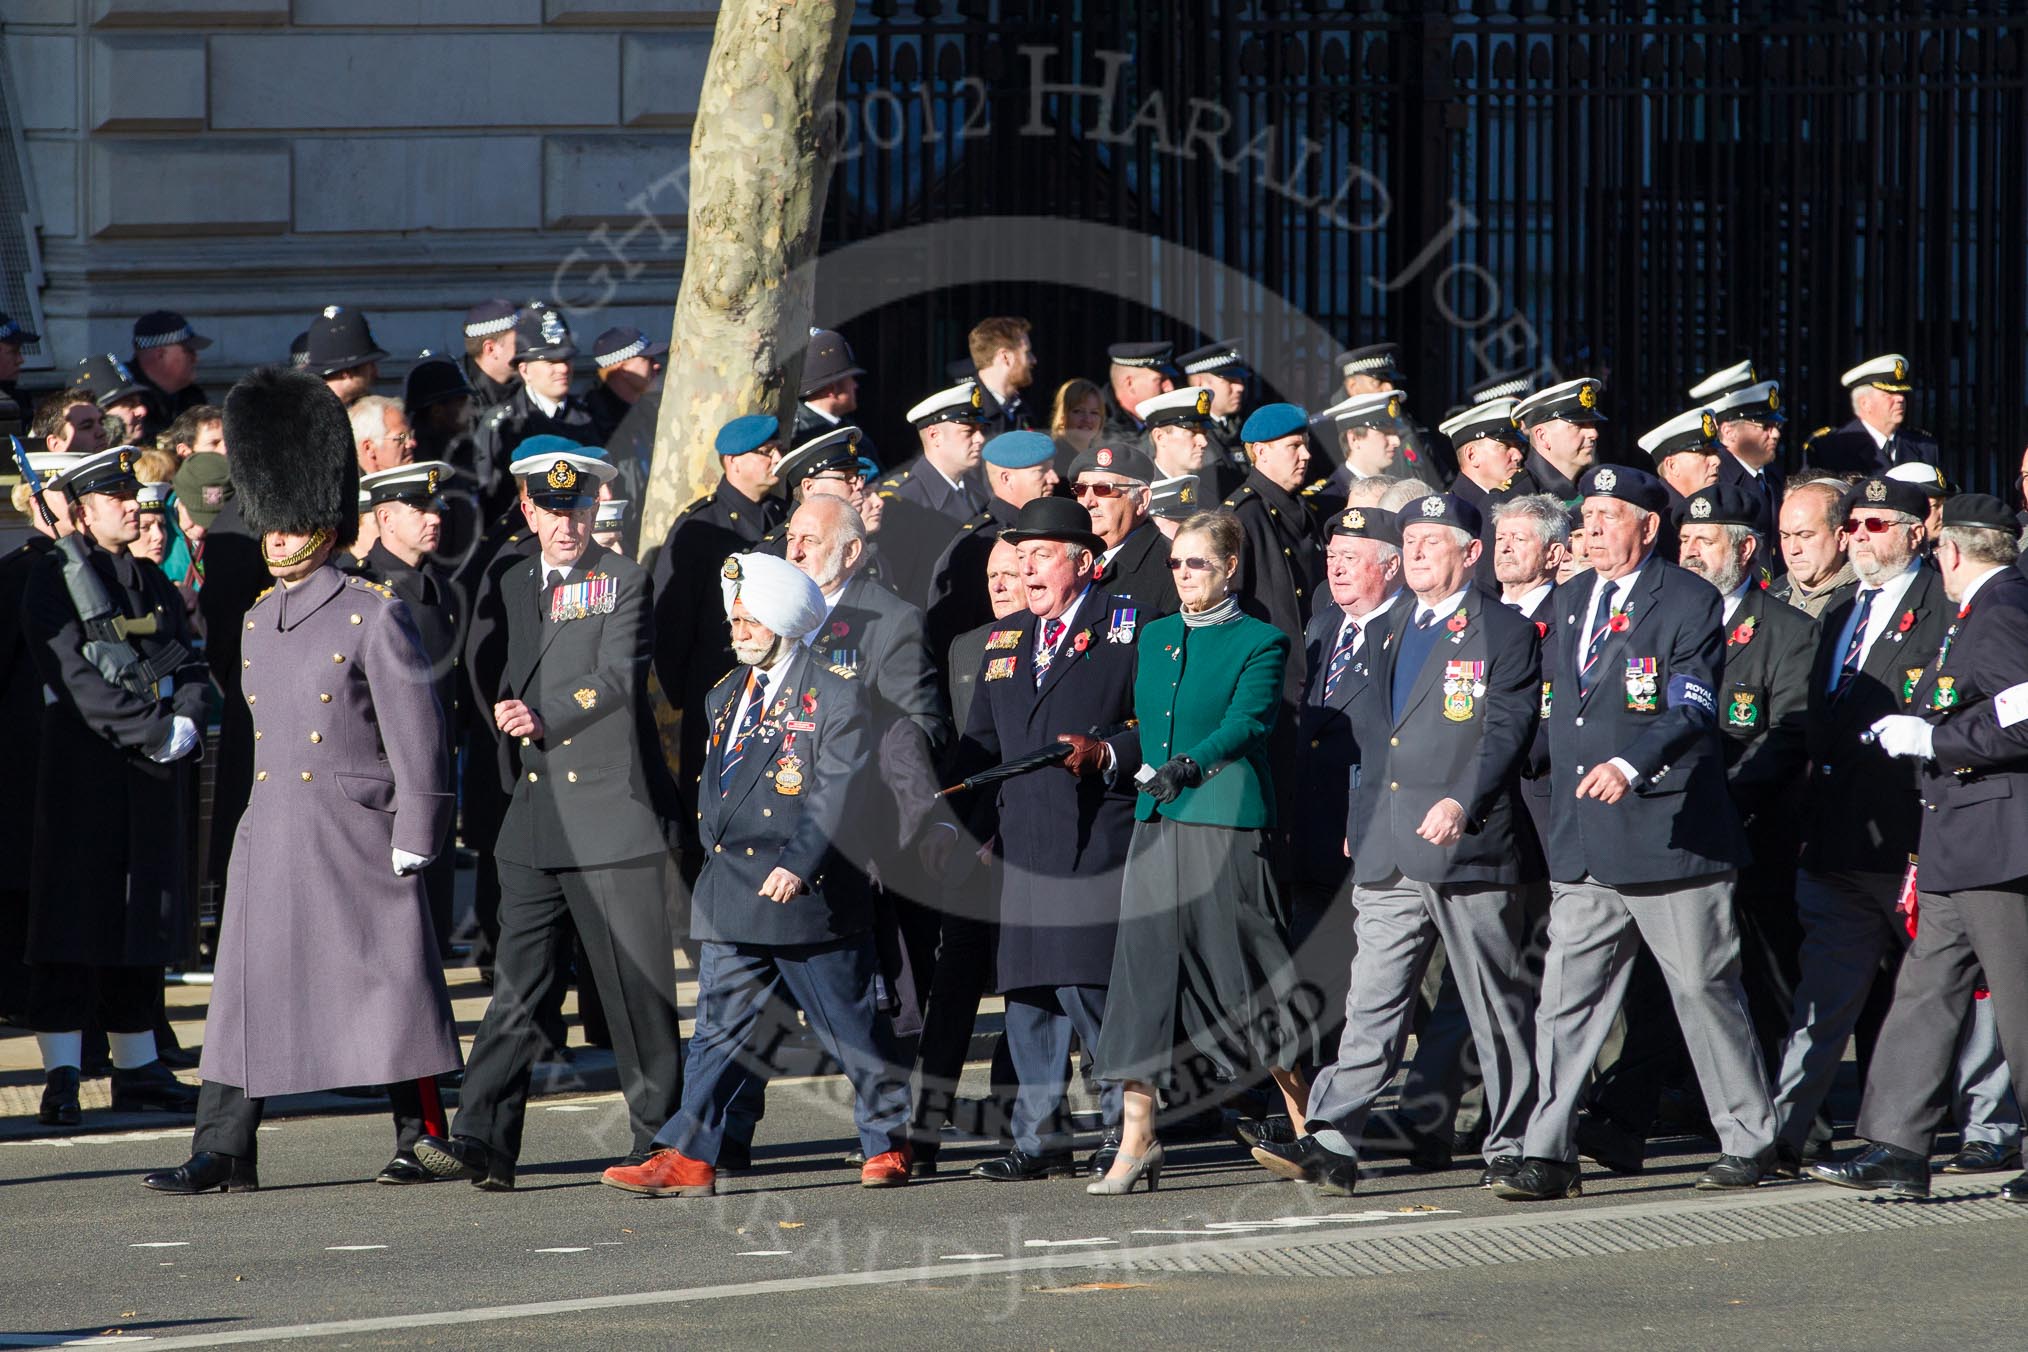 Remembrance Sunday 2012 Cenotaph March Past: Group E1 - Royal Naval Association..
Whitehall, Cenotaph,
London SW1,

United Kingdom,
on 11 November 2012 at 11:38, image #34